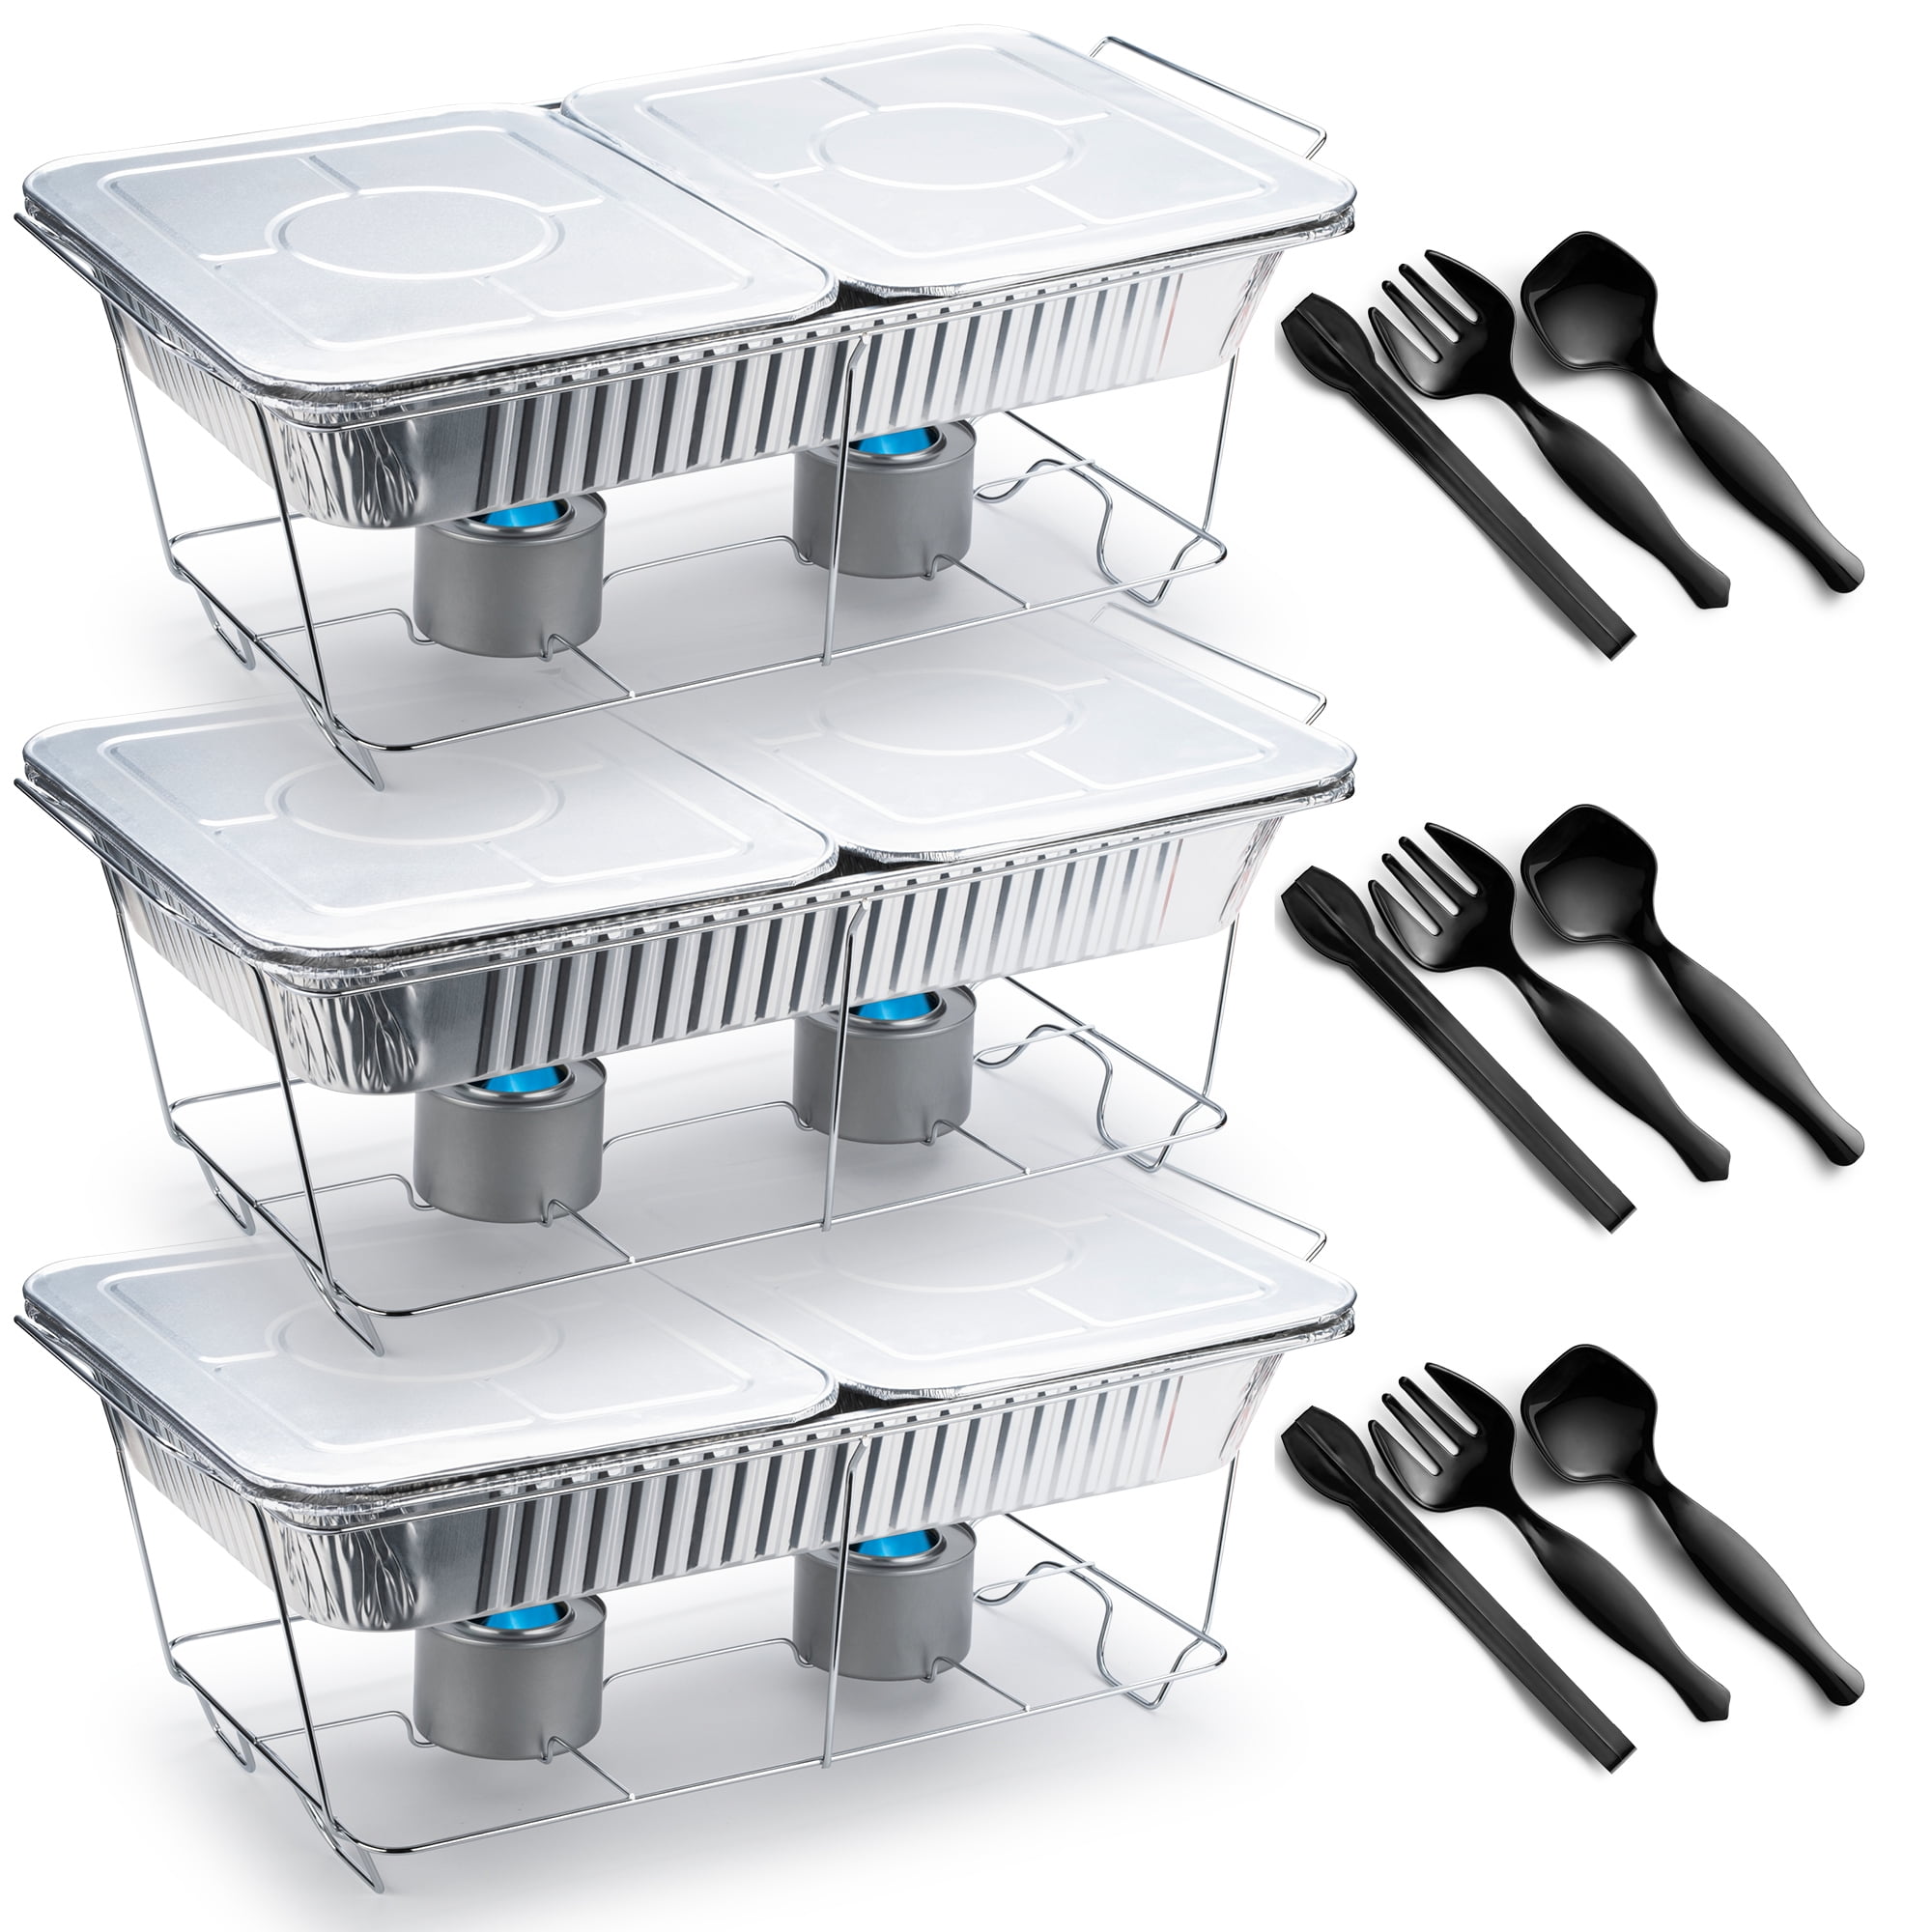 36PC Buffet Serving Kit Disposable Aluminum Refill Chafing Dish